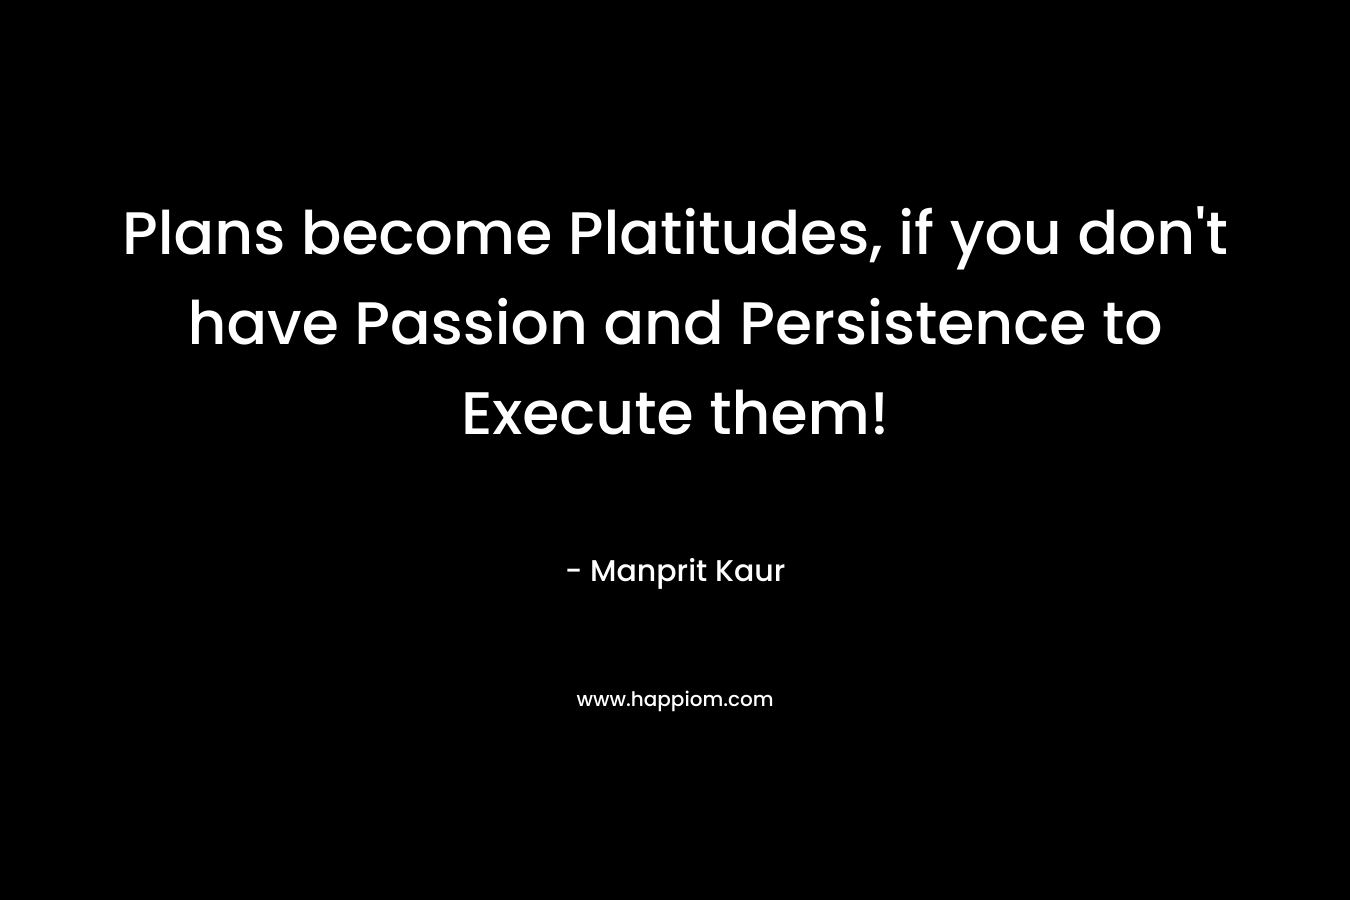 Plans become Platitudes, if you don’t have Passion and Persistence to Execute them! – Manprit Kaur